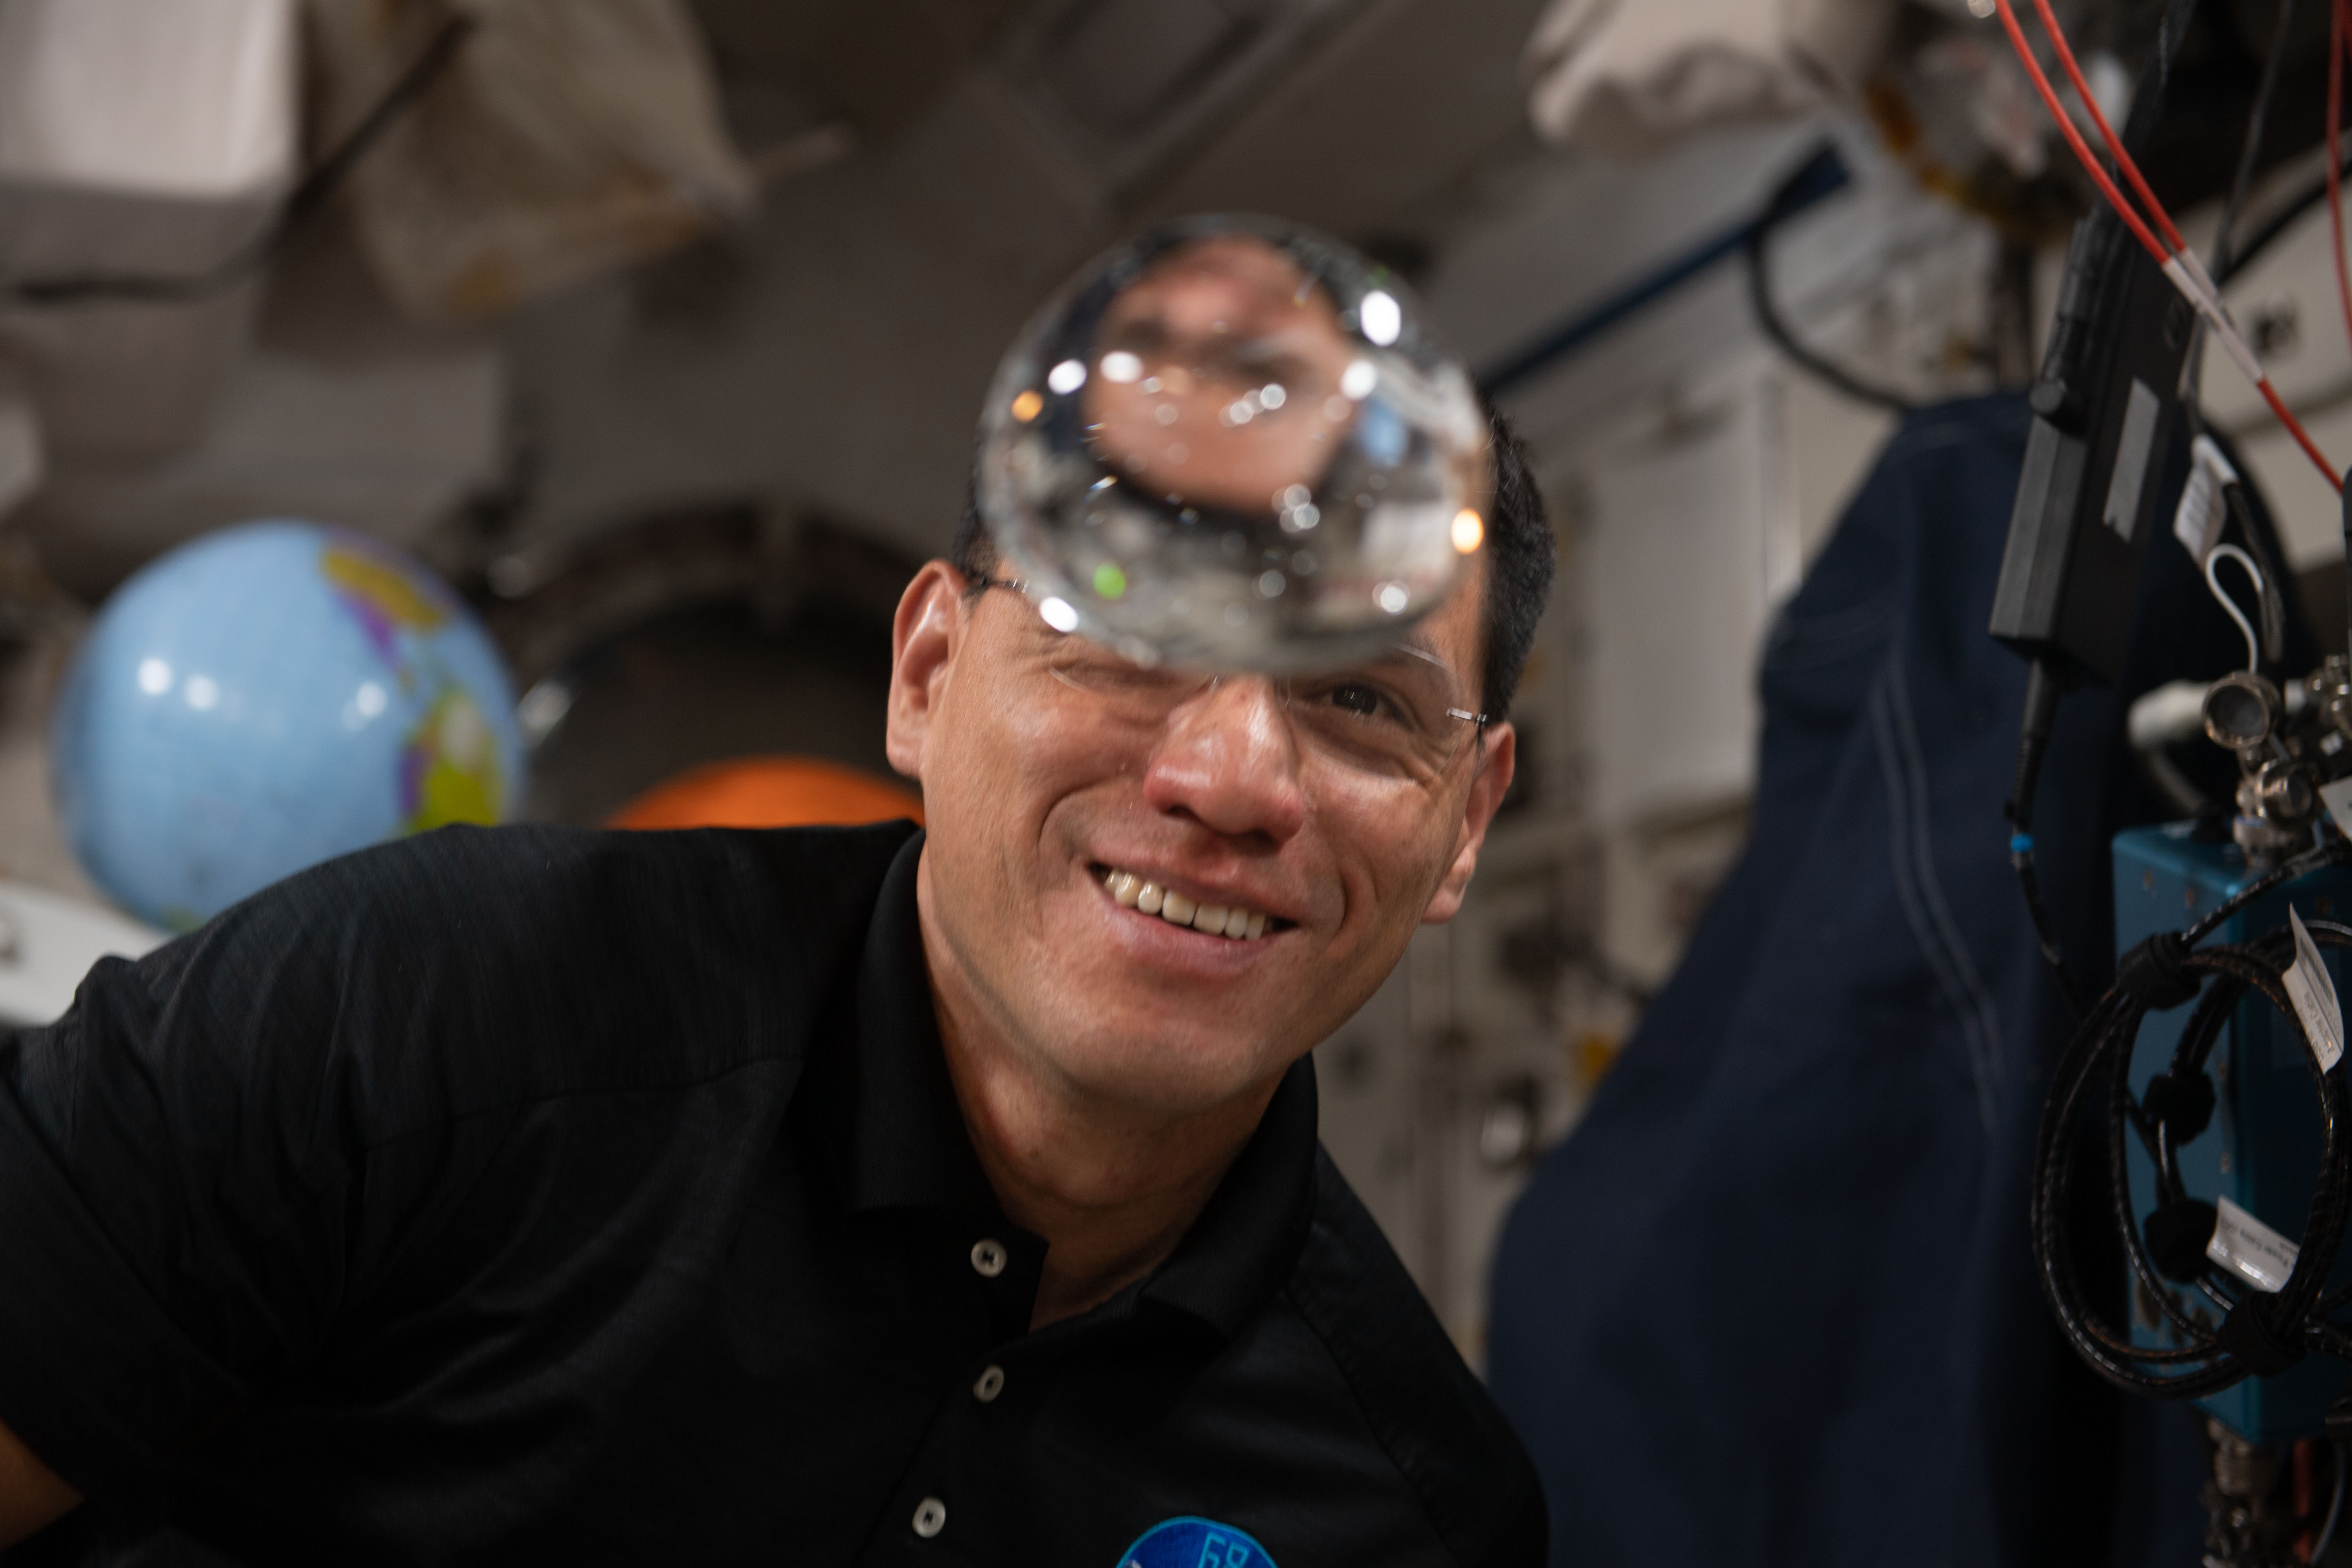 Houston We Have a Podcast: Ep. 293: NASA astronaut and Expedition 69 Flight Engineer Frank Rubio has fun with fluid physics as he observes the behavior of a free-flying water bubble inside the International Space Station's Kibo laboratory module.